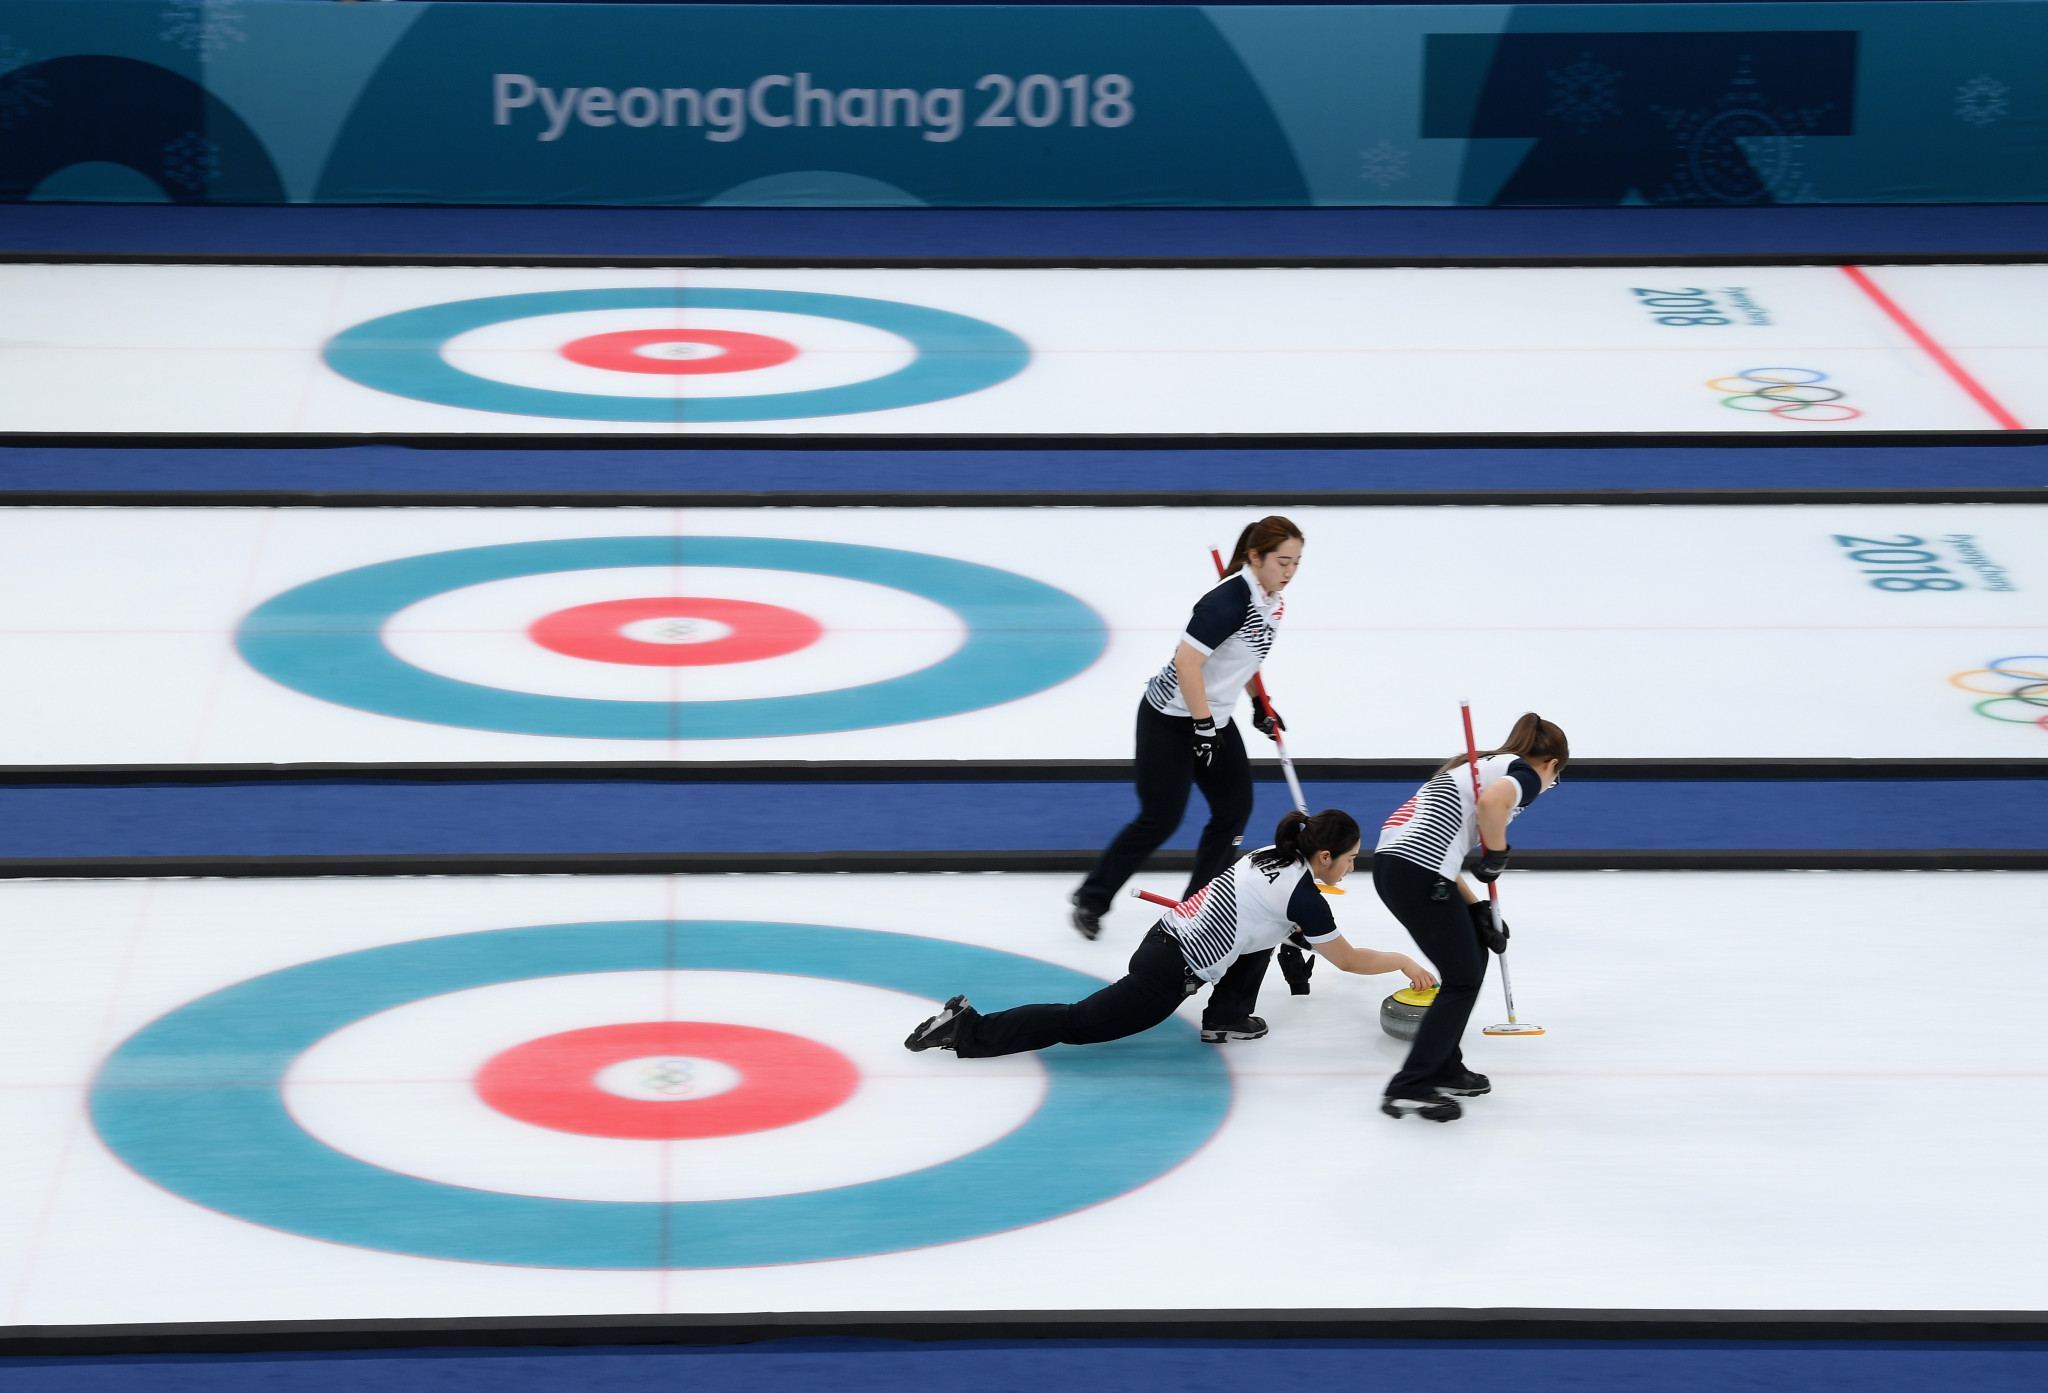 Mariann Bardocz-Bencsik worked for the World Curling Federation at the 2018 Winter Olympic Games in Pyeongchang ©Getty Images